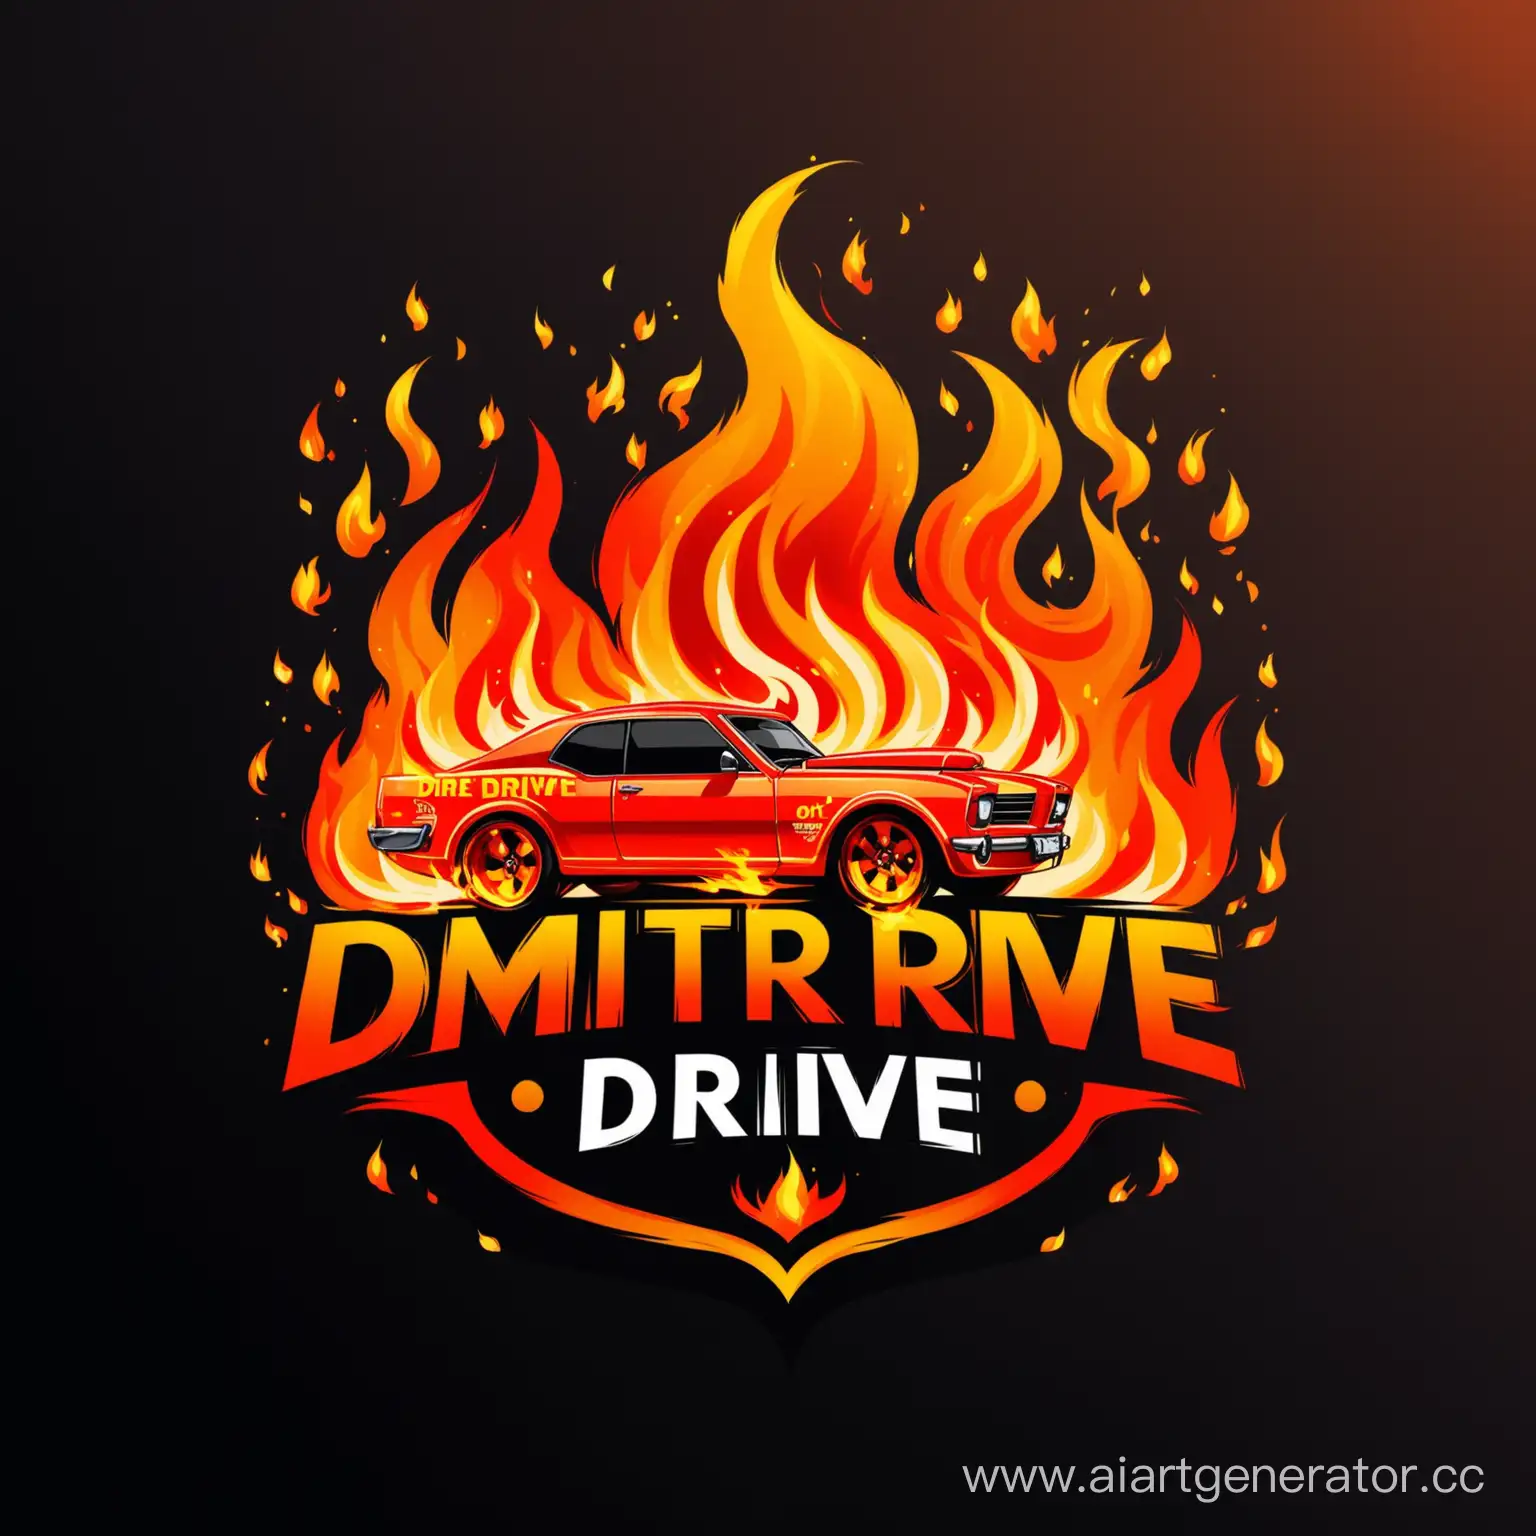 Dmitriy-Drive-Car-Detailing-Logo-with-Fiery-Typography